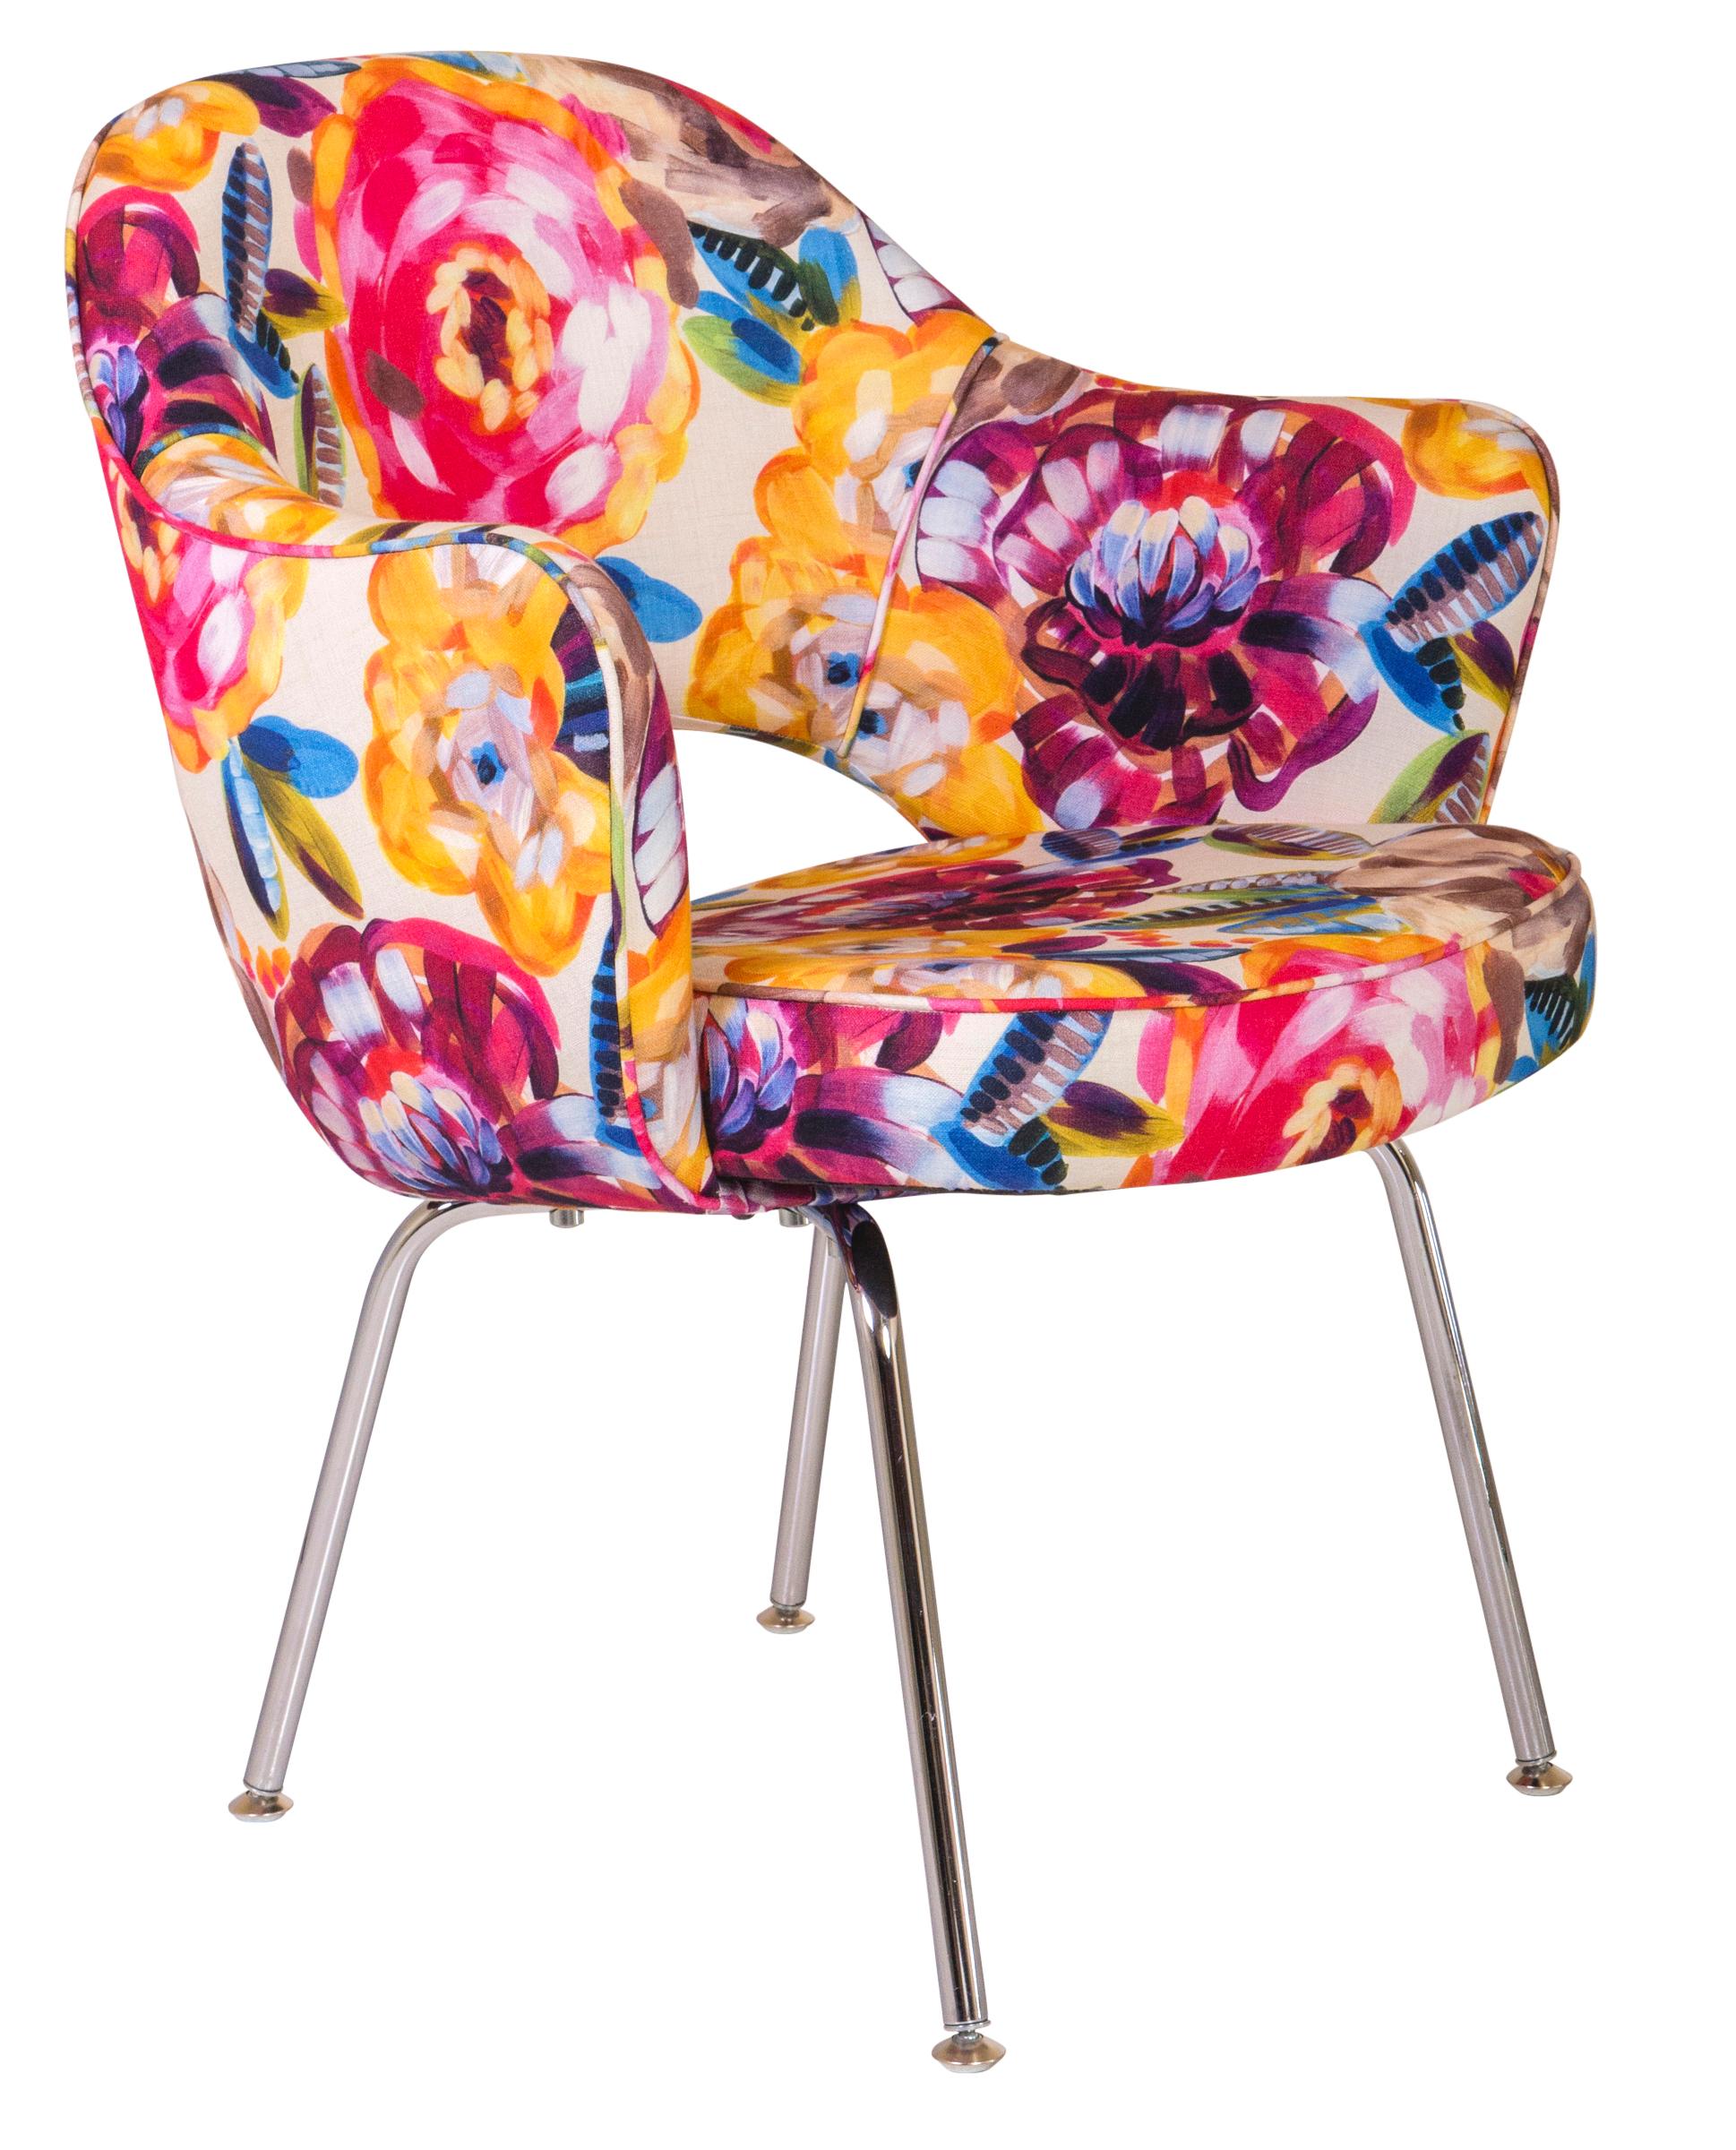 We have been restoring Saarinen executive chairs for years in every fabric one can imagine, right in our very own workroom. We’ve restored this chair using a stunning Italian Cotton Floral. Skilled craftsmen bring each chair back to life to live on